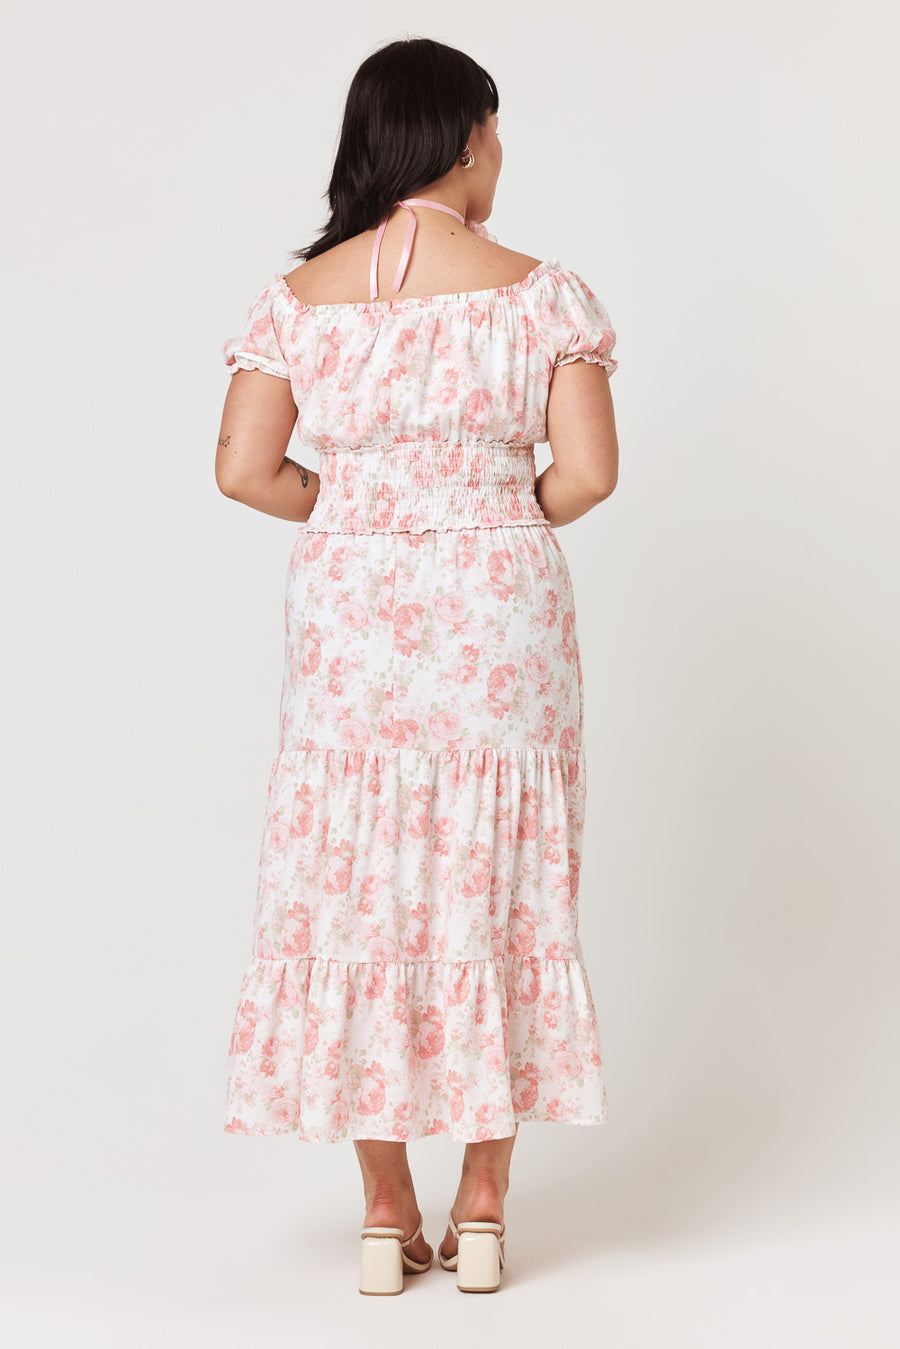 White Pink Floral Off The Shoulder Midi Dress - Trixxi Clothing